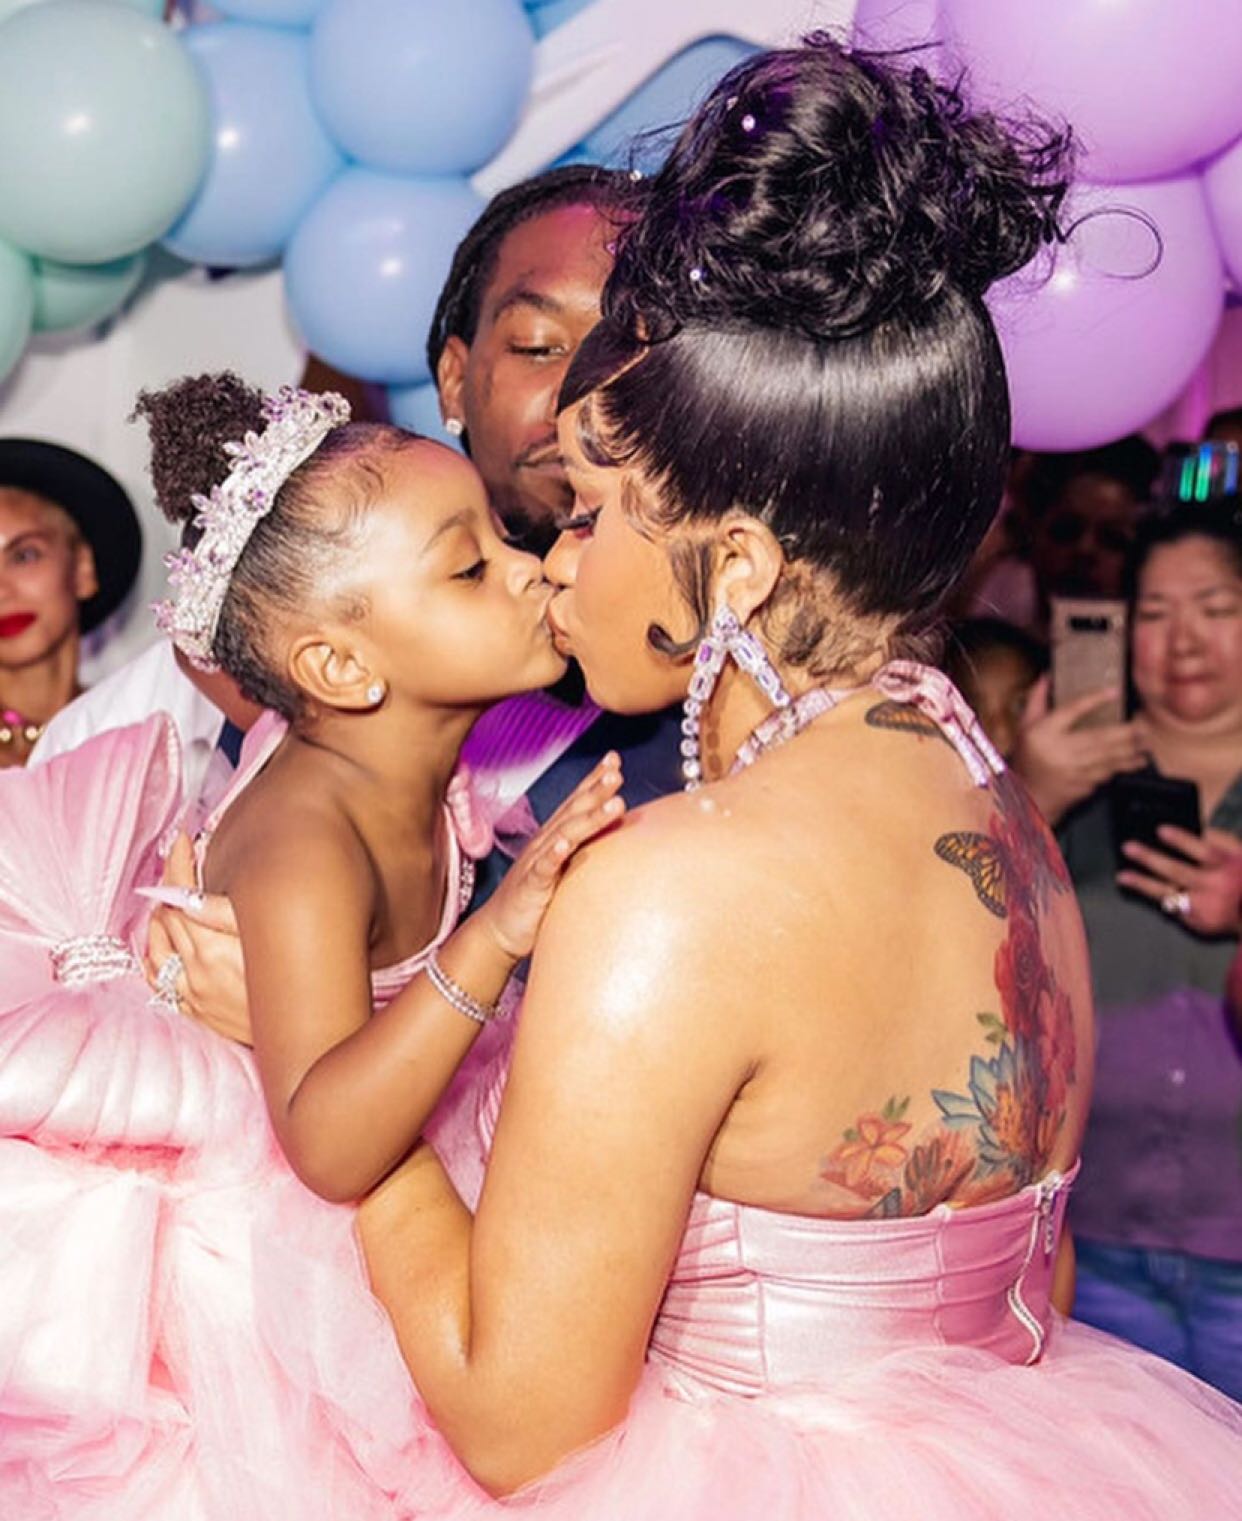 Did Cardi B And Offset Just Gift Their 3yr Old Daughter A Present Worth Quarter A Million Dollars?